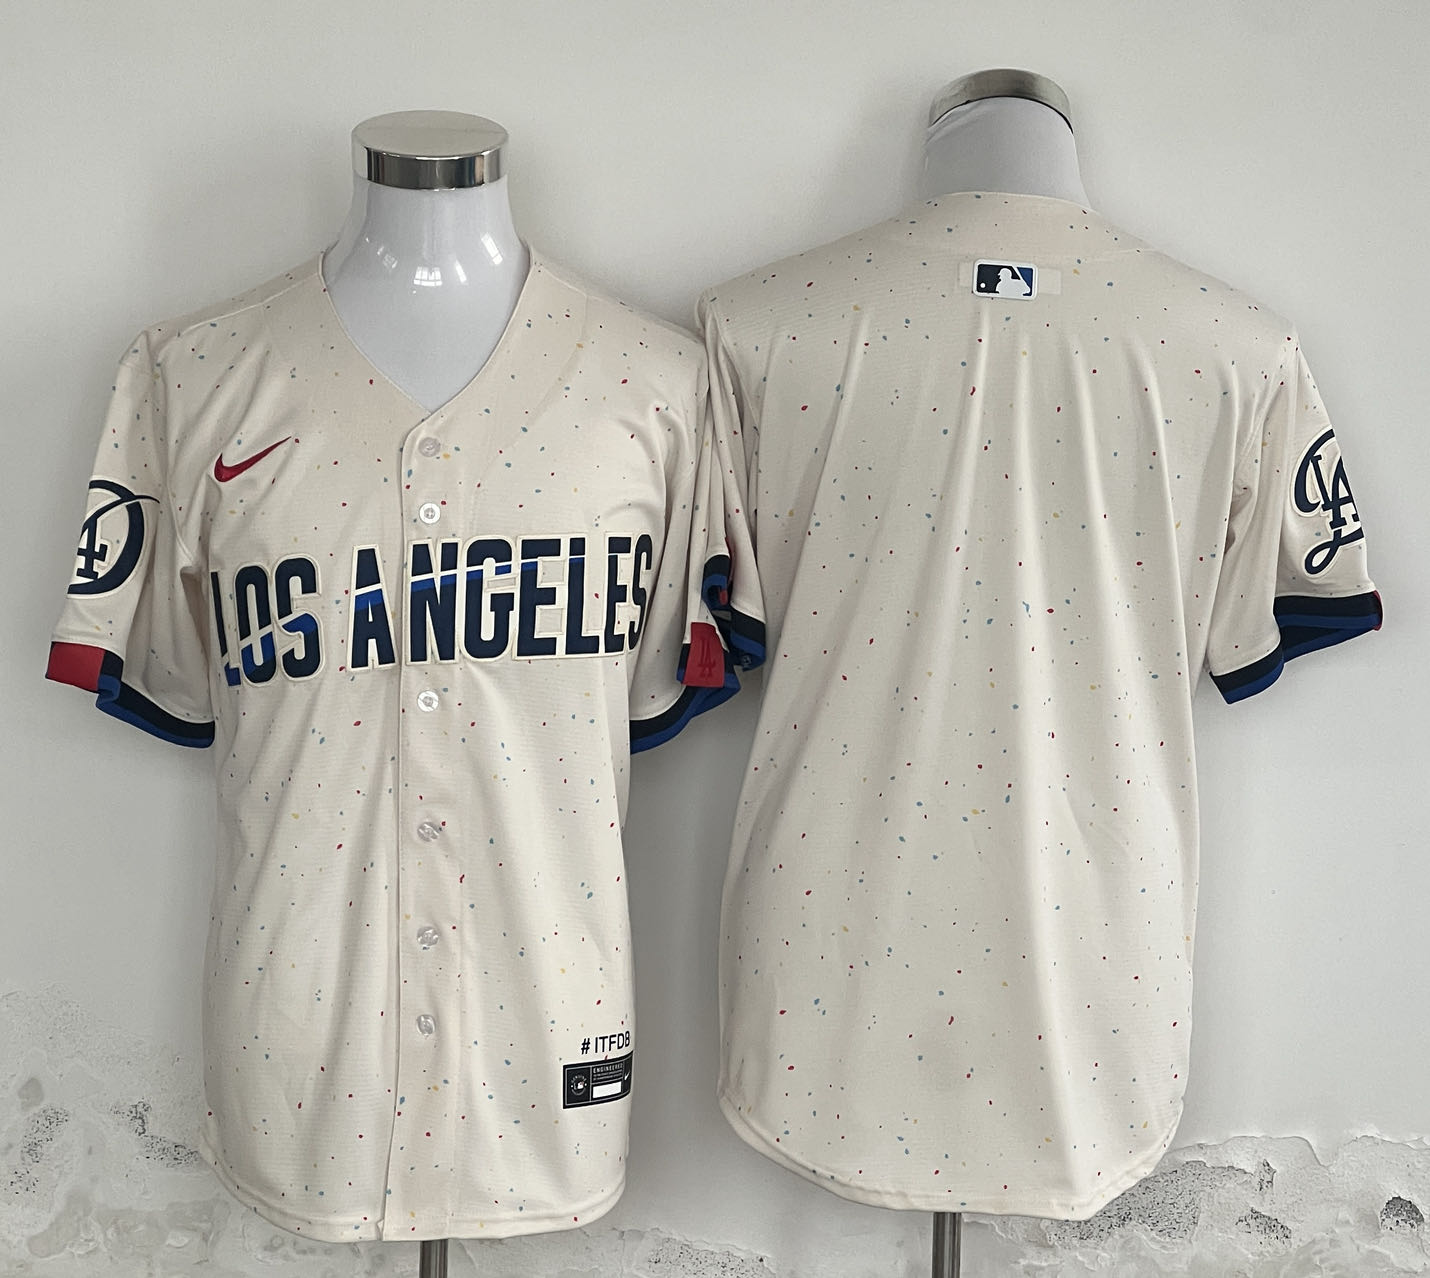 Men's Los Angeles Dodgers Blank Cream Stitched Baseball Jersey